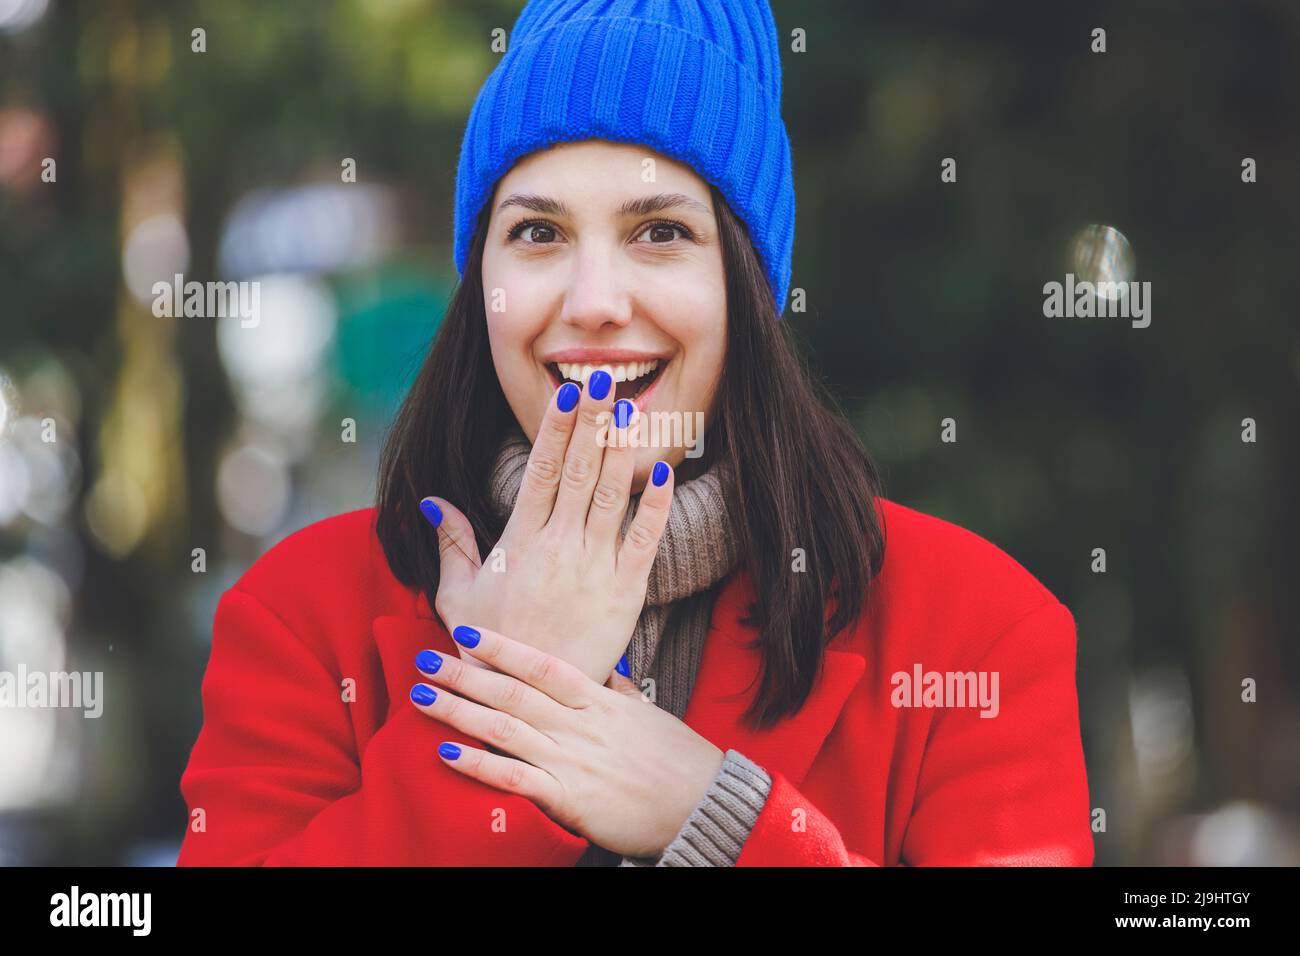 Surprise young woman with blue nail polish covering mouth with hand Stock Photo